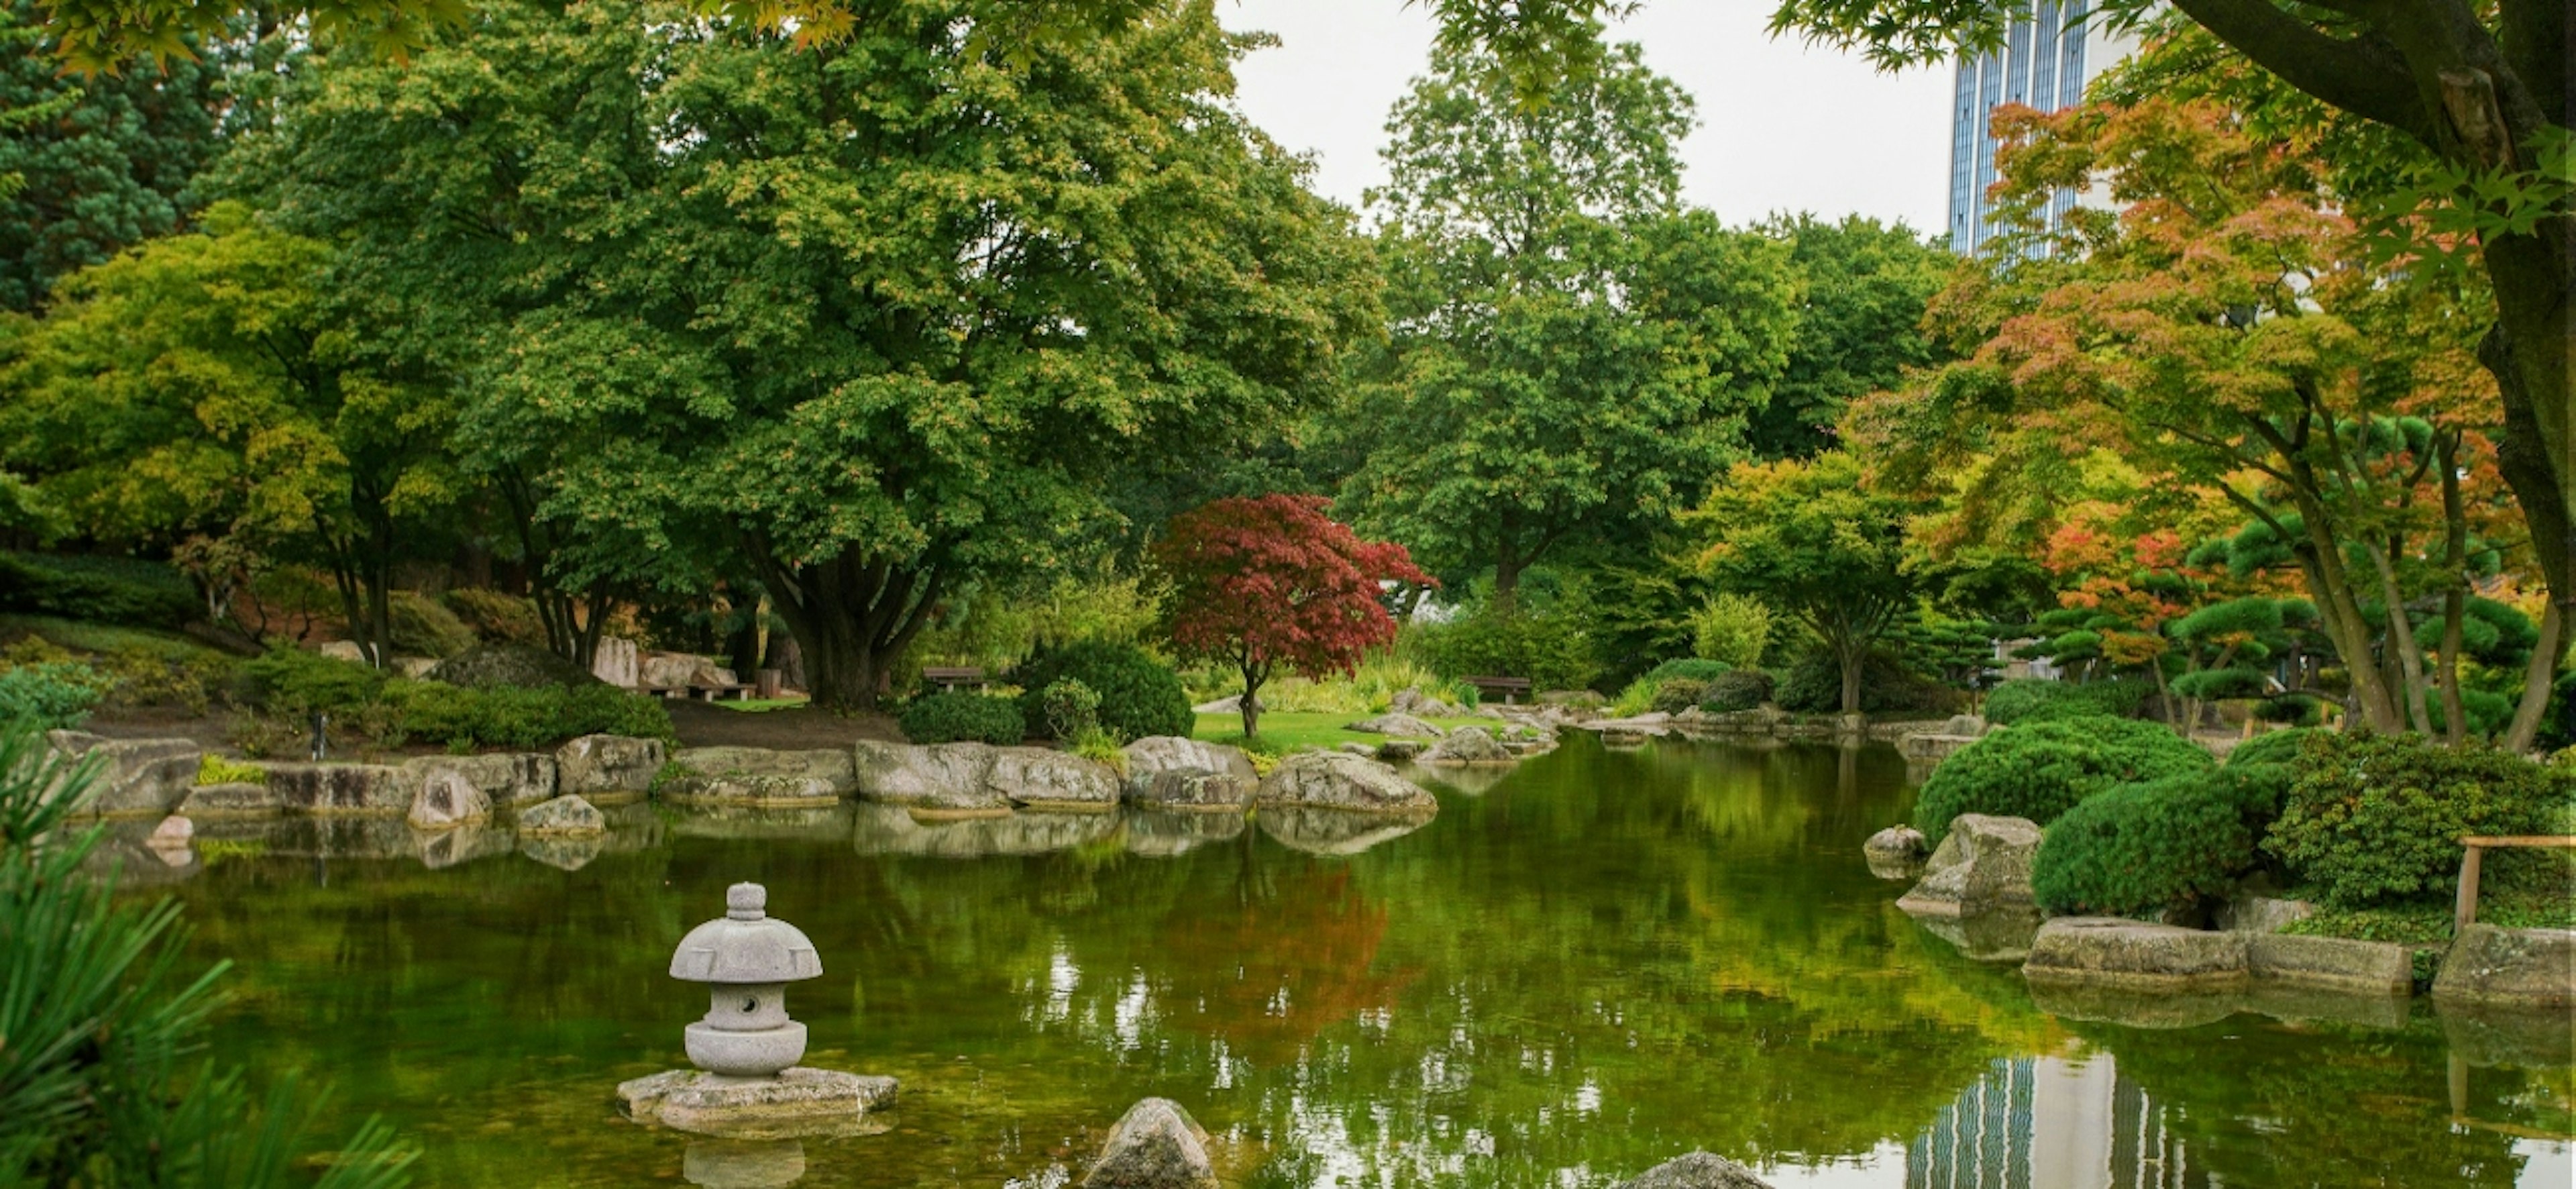 A view of the Japanese Garden in Hamburg with the autumn color of the leaves of the pond and the reflections in the water